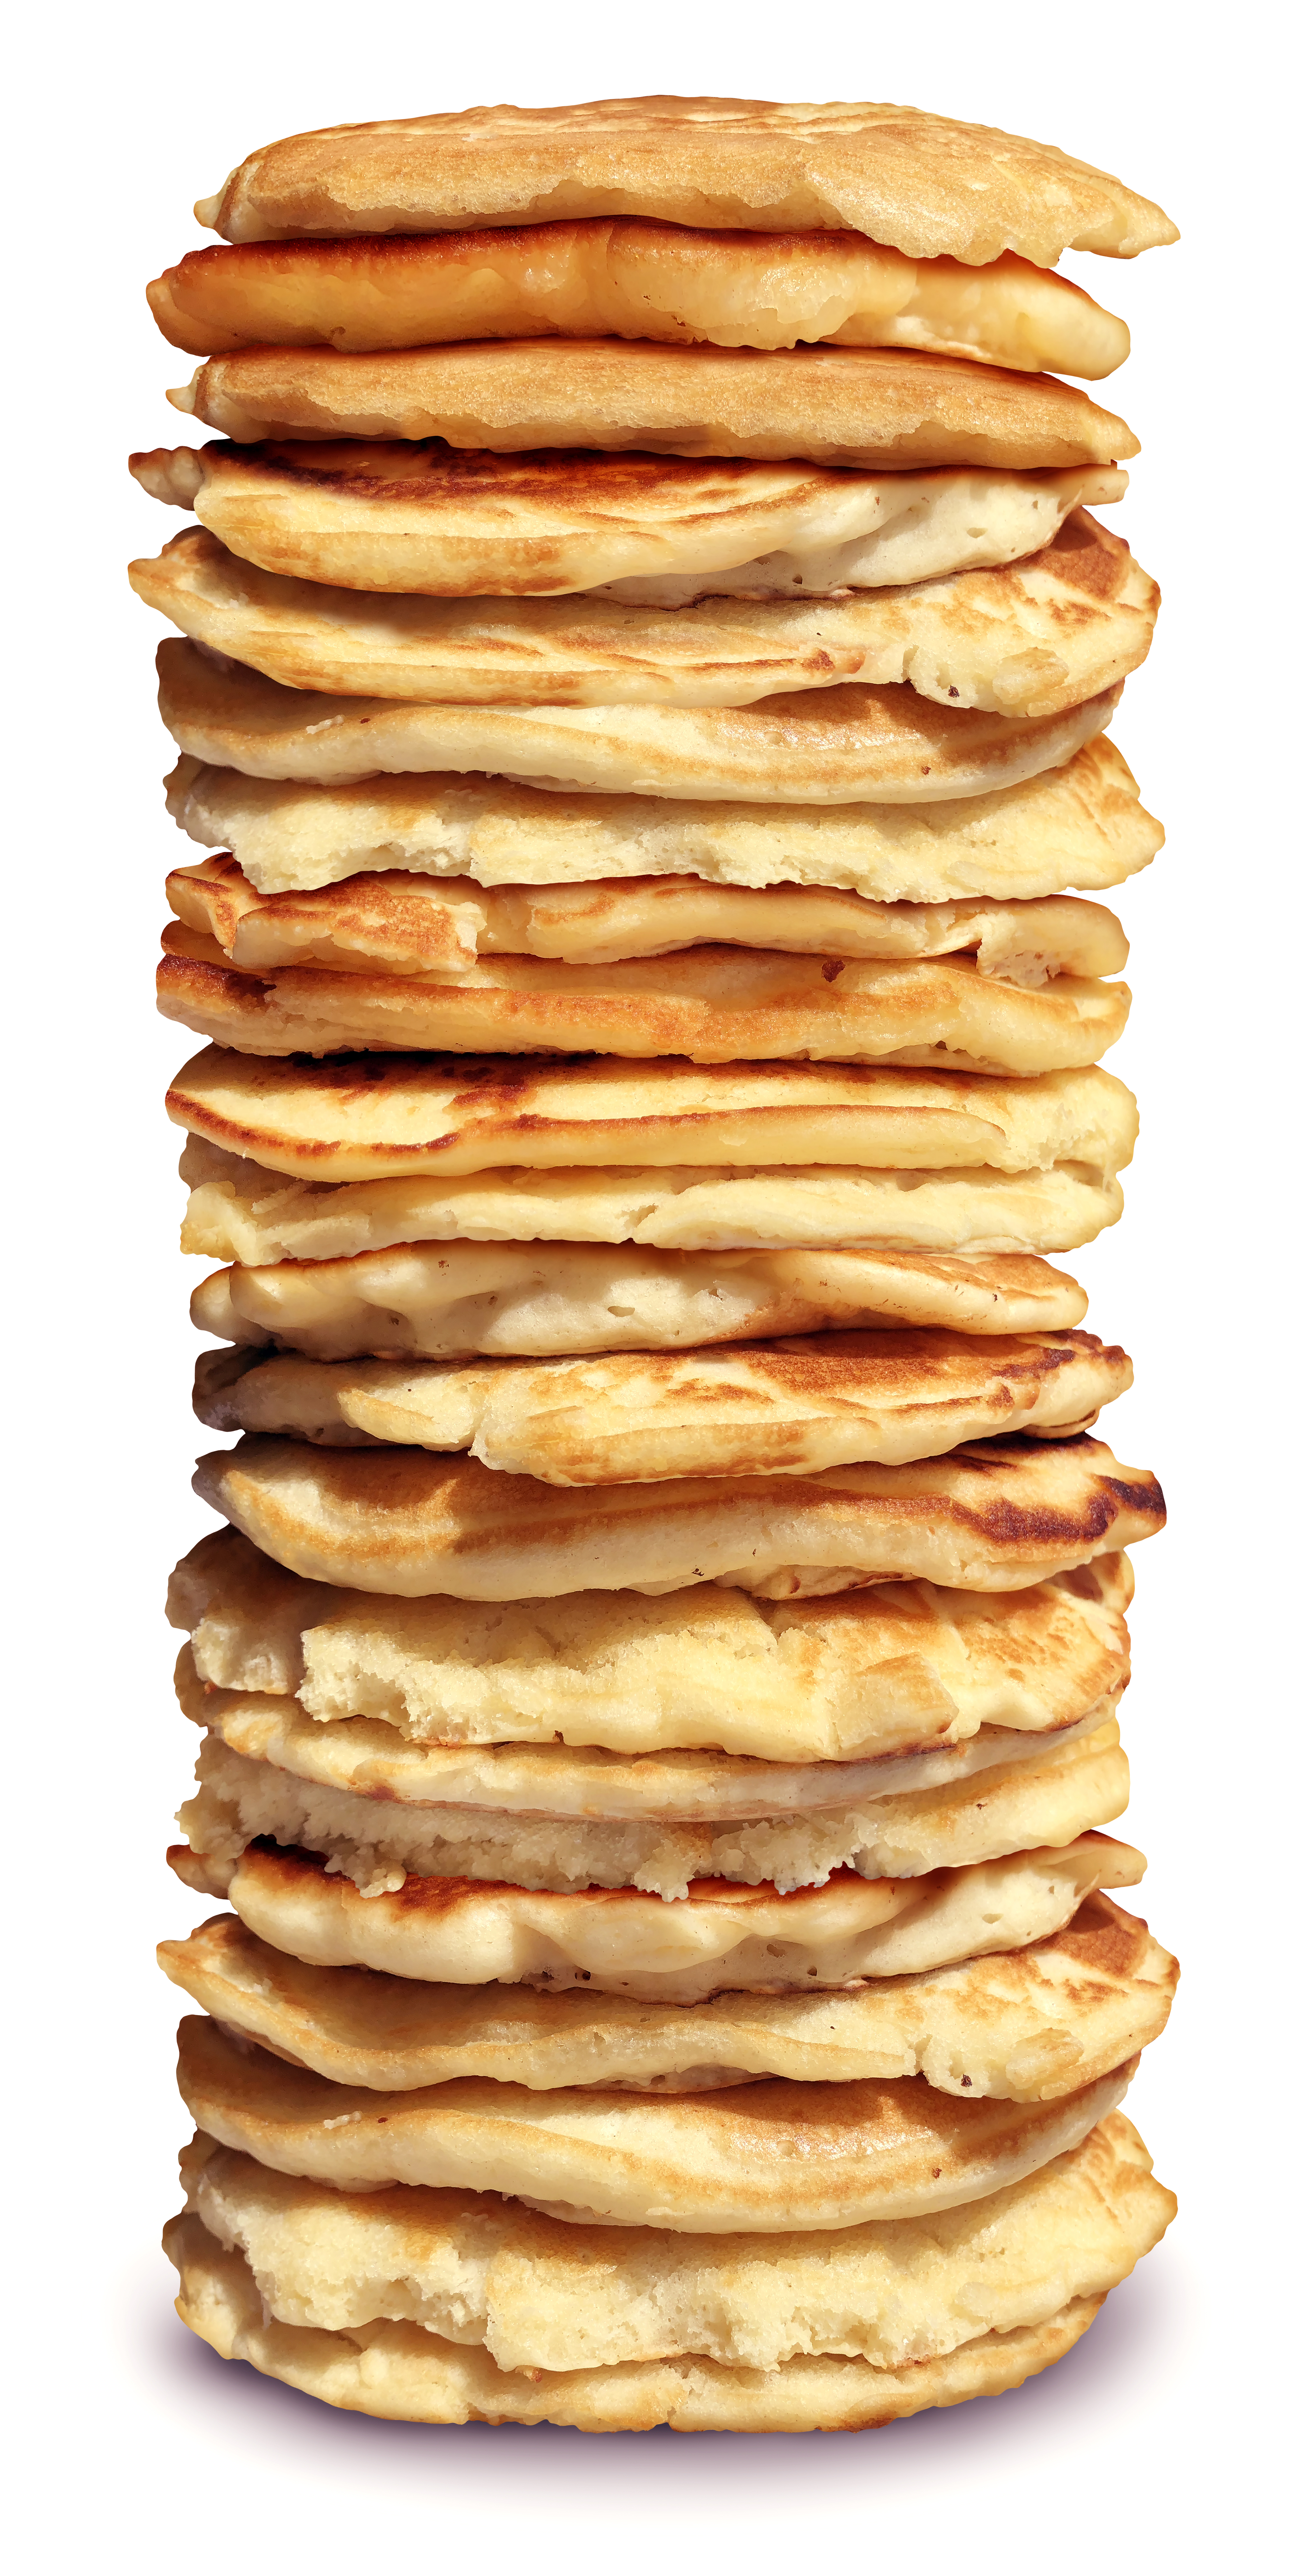 Tallest Stack of Pancakes